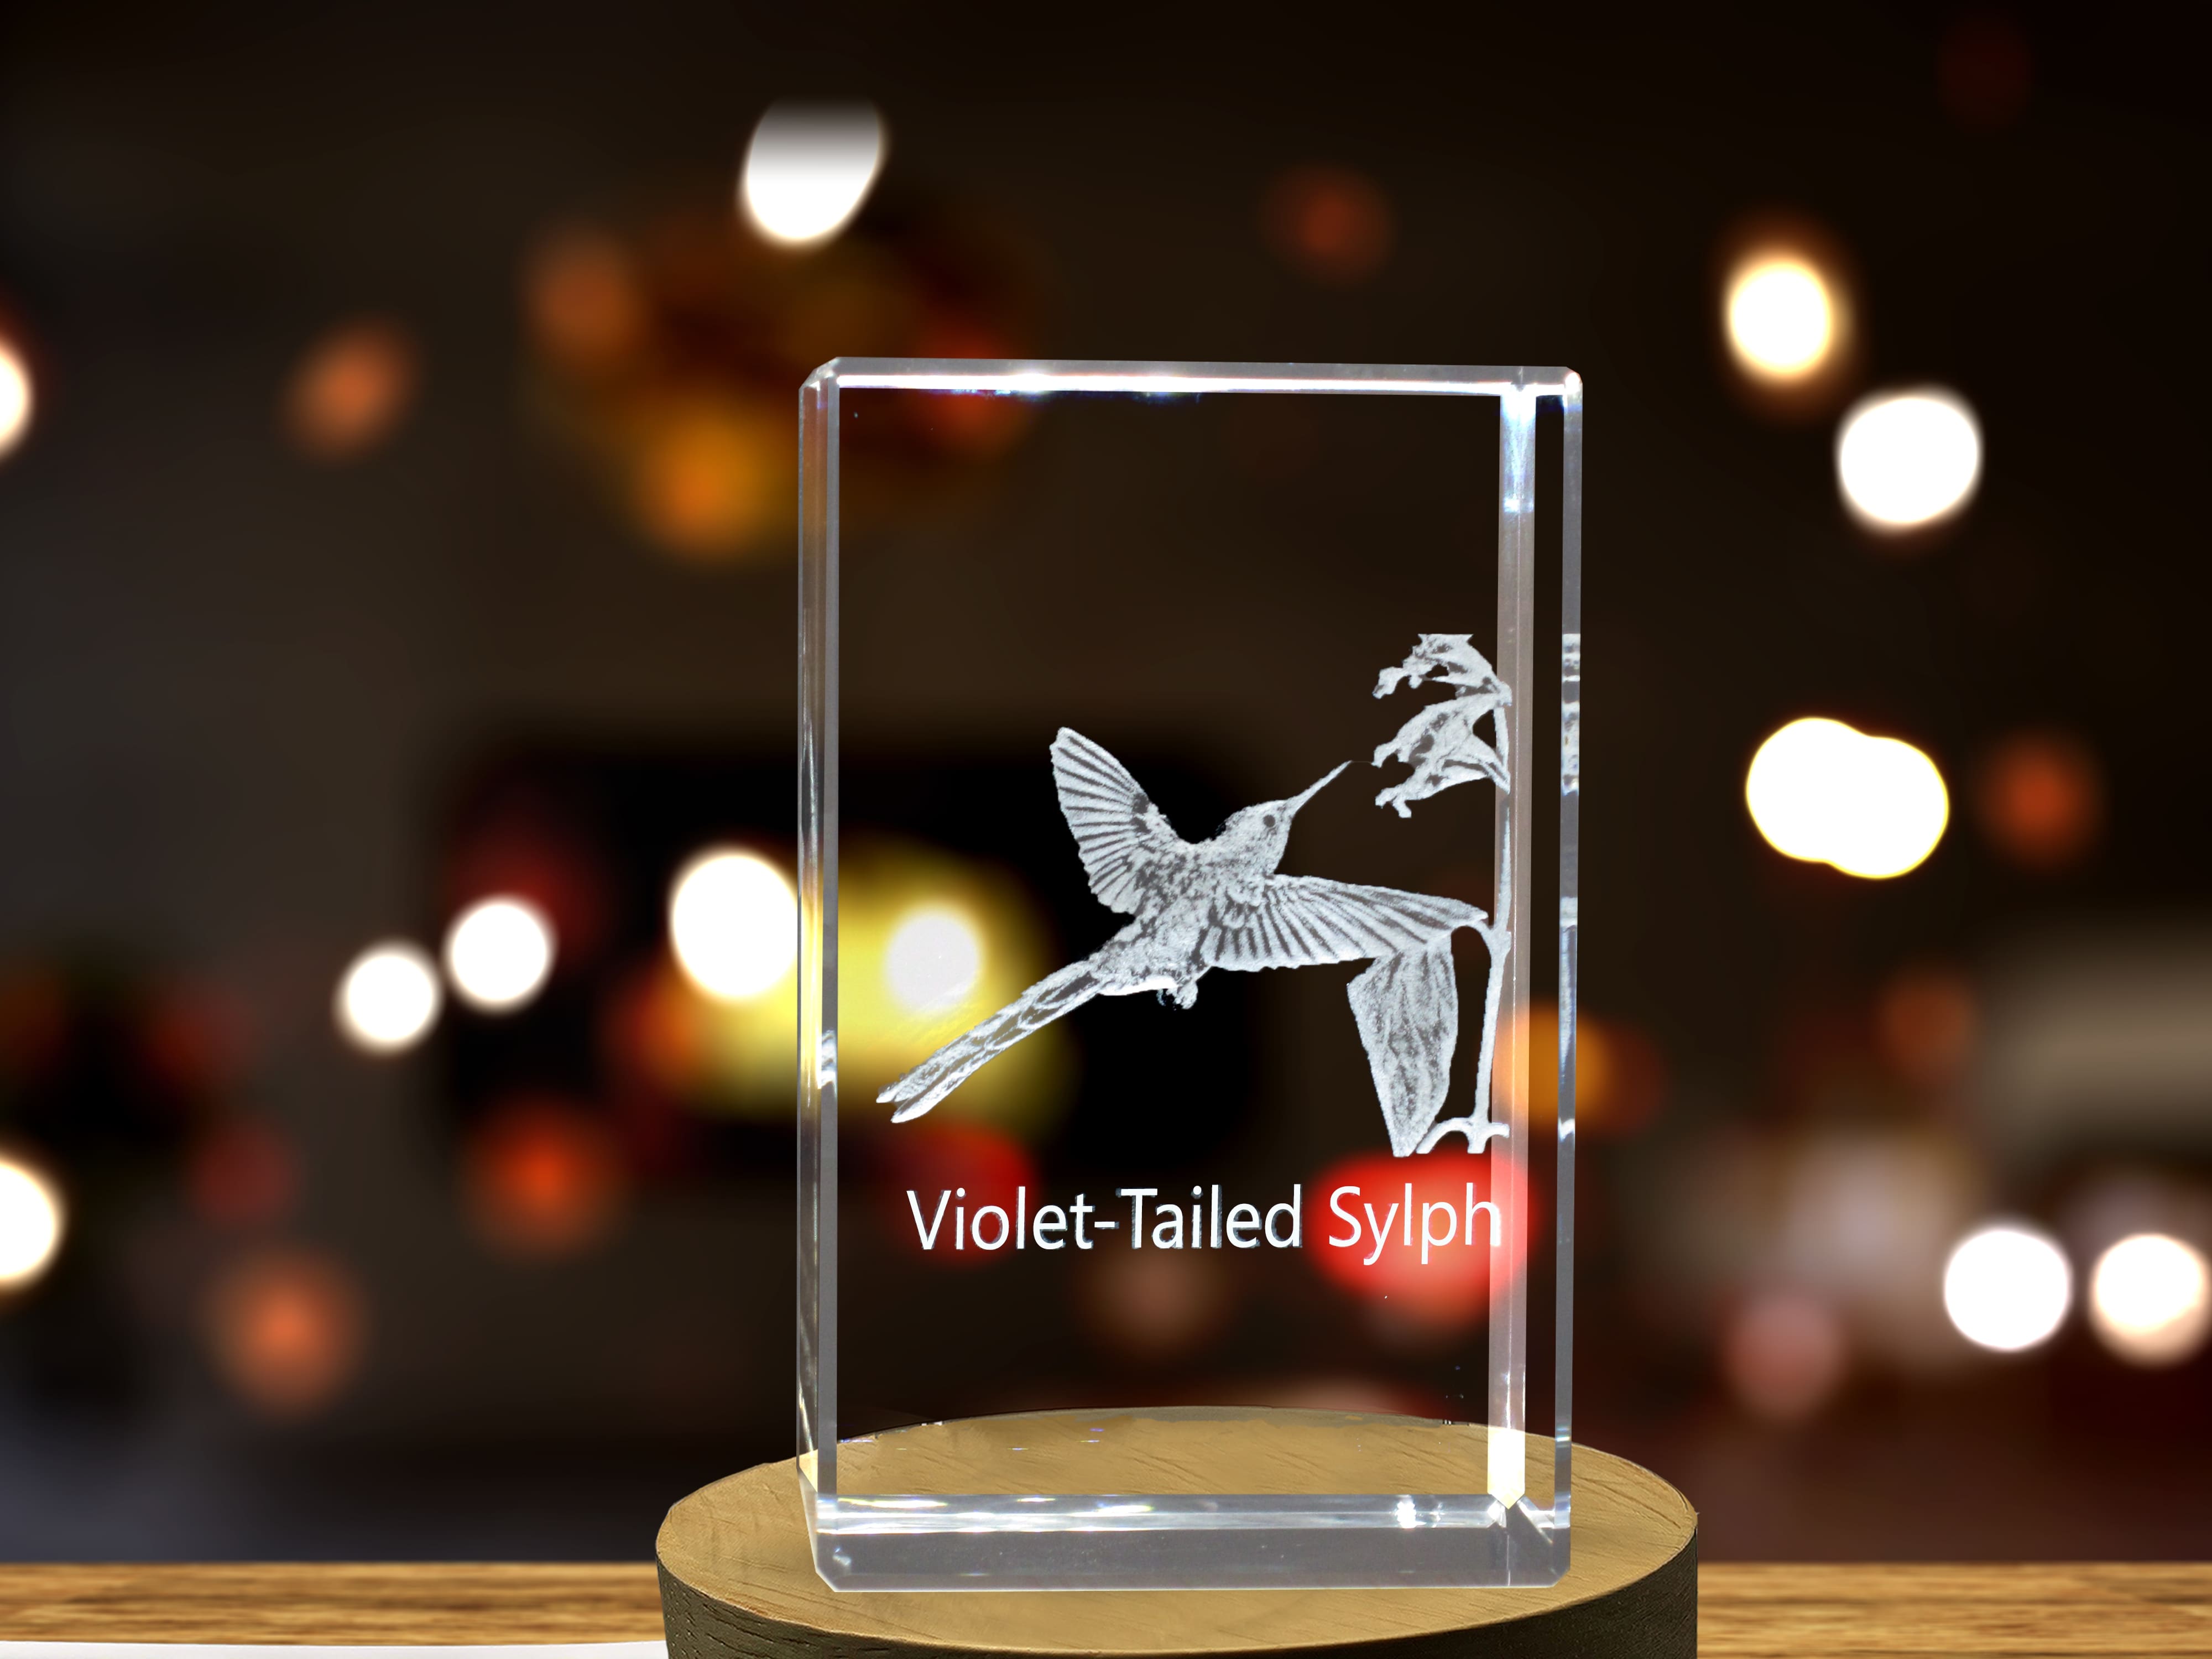 Violet-Tailed Sylph 3D Engraved Crystal 3D Engraved Crystal Keepsake/Gift/Decor/Collectible/Souvenir A&B Crystal Collection